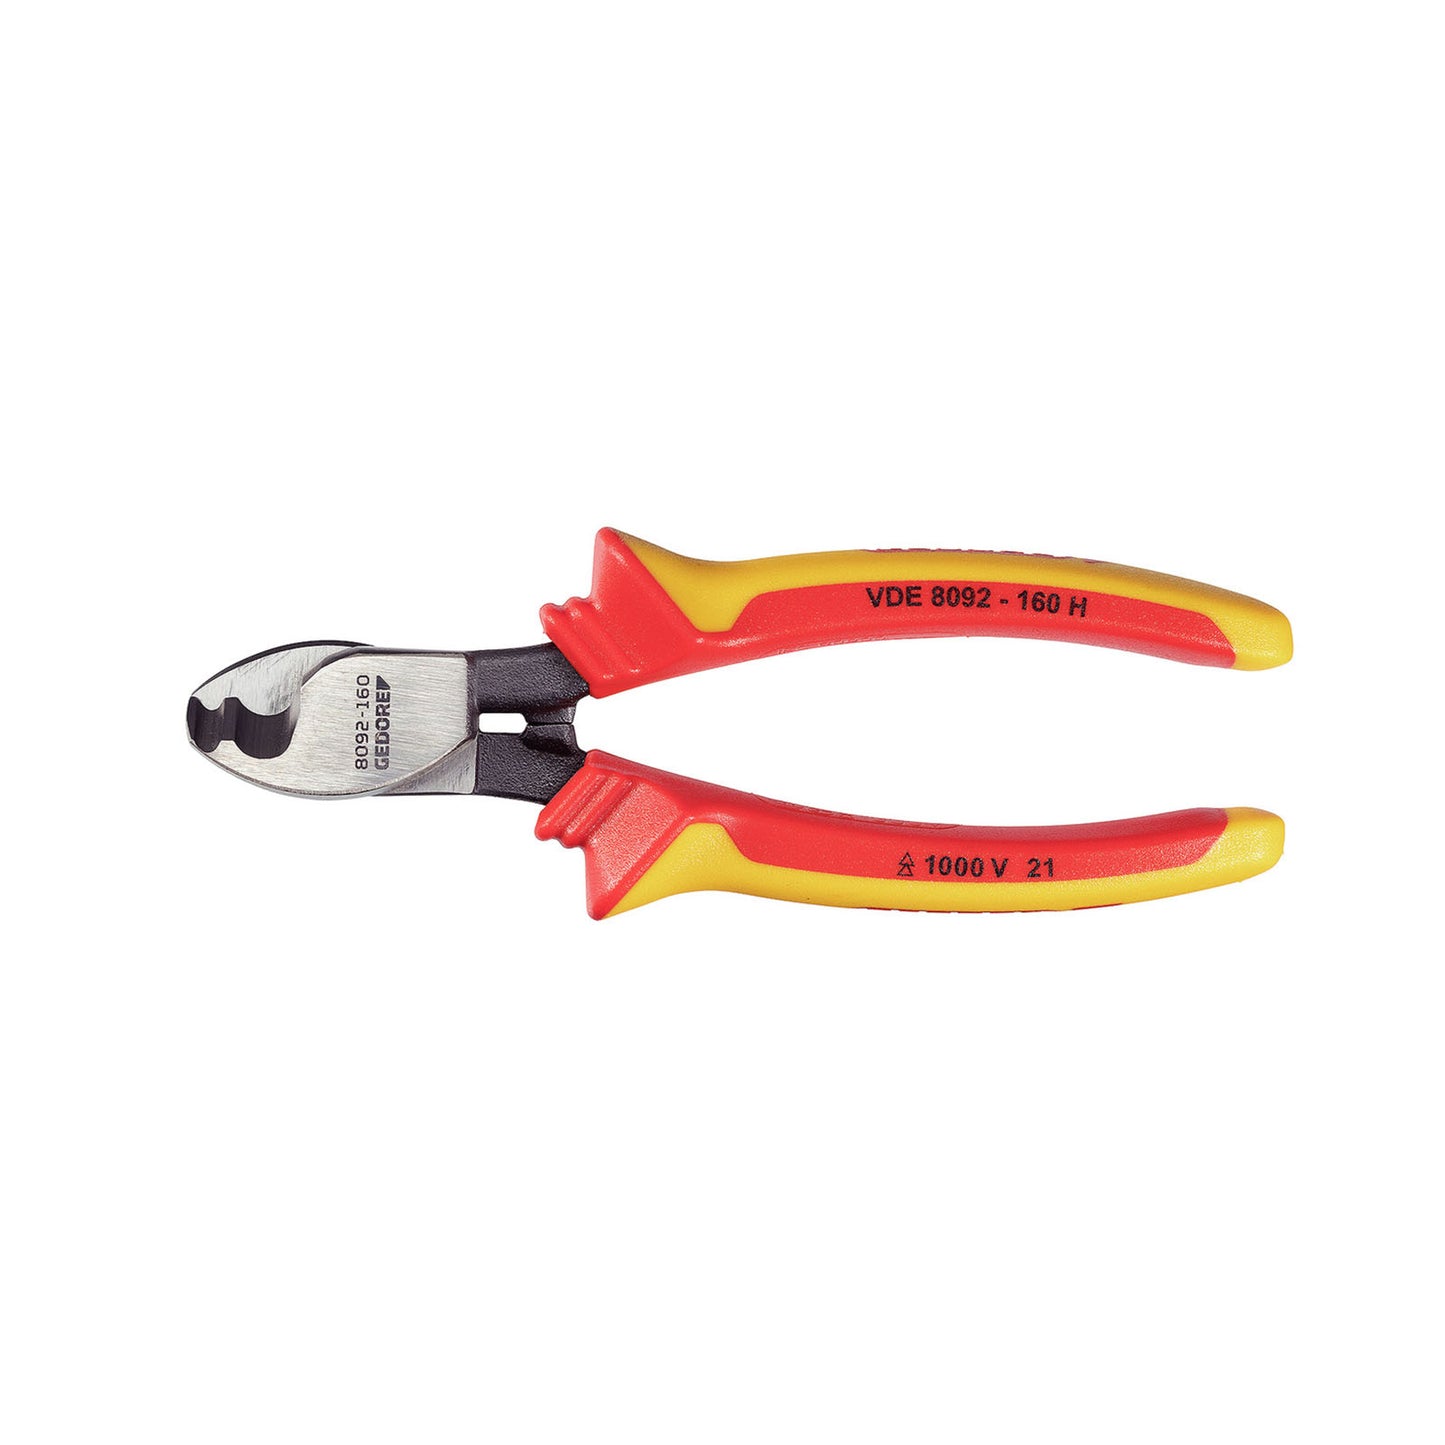 GEDORE VDE 8092-160 H - Cable cutter (3412407)